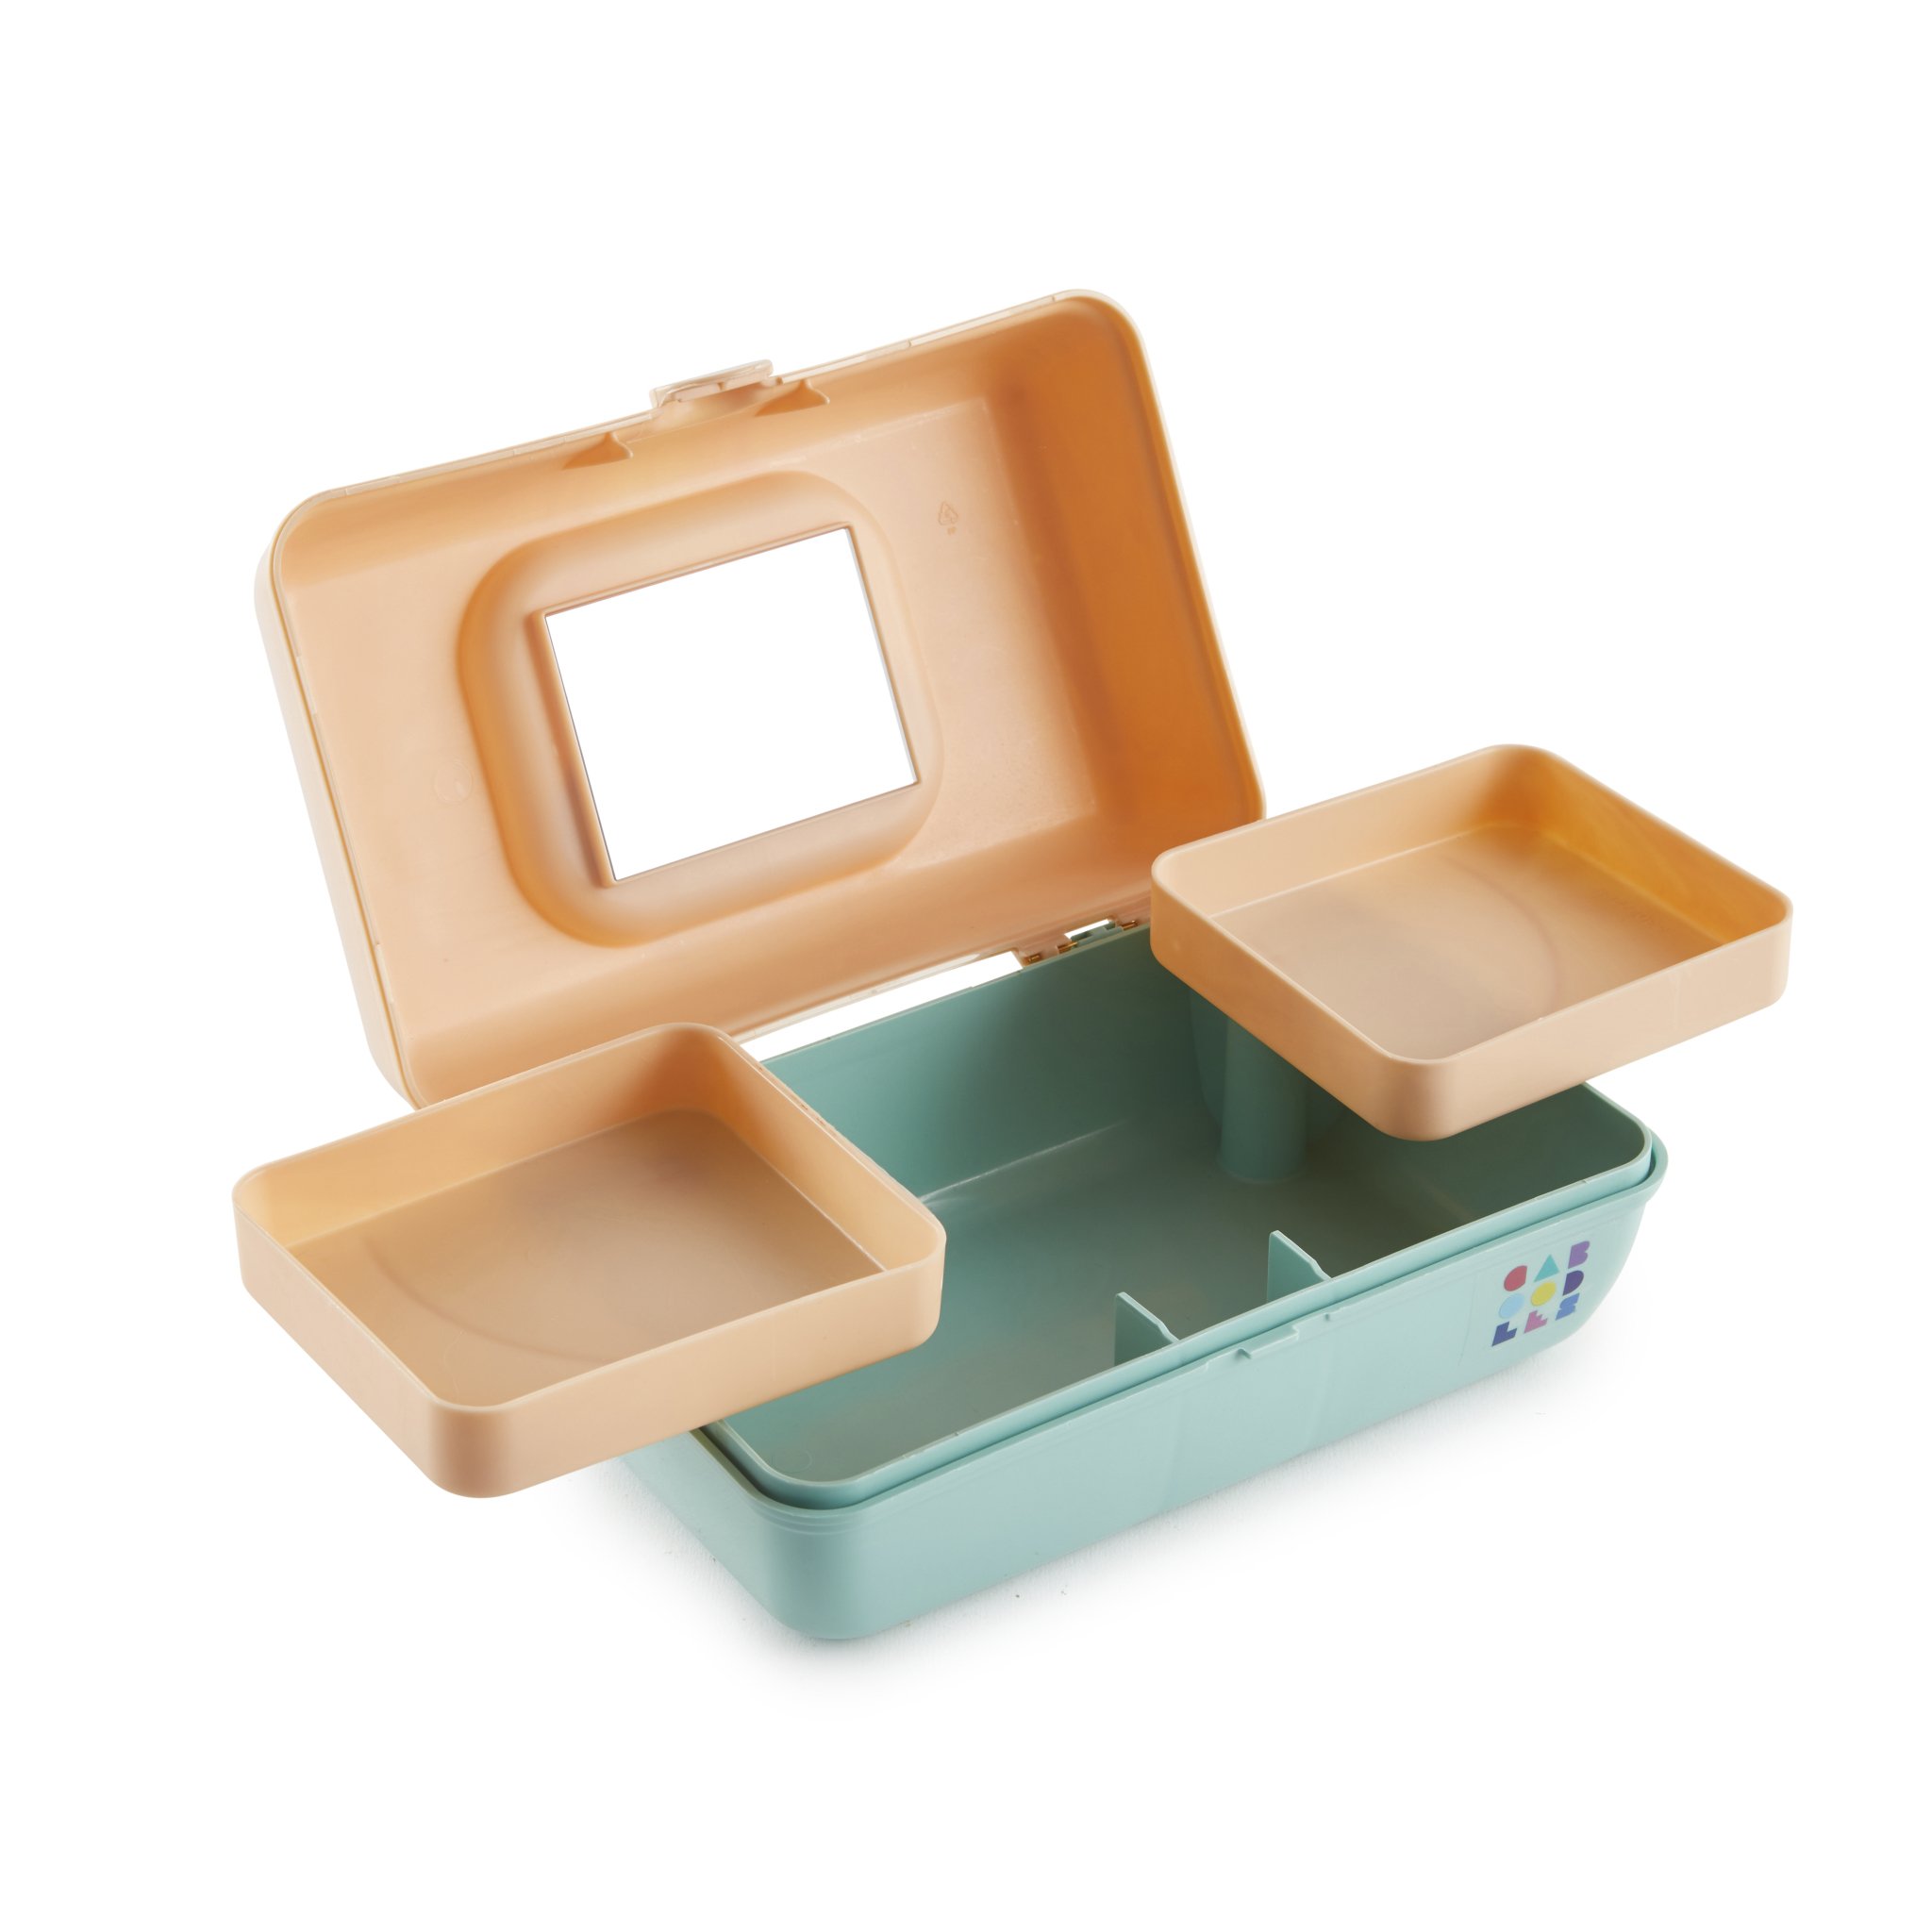 Caboodles Pretty in Petite Peach Lid and Sea Foam Base Vintage Case, 1 Pound